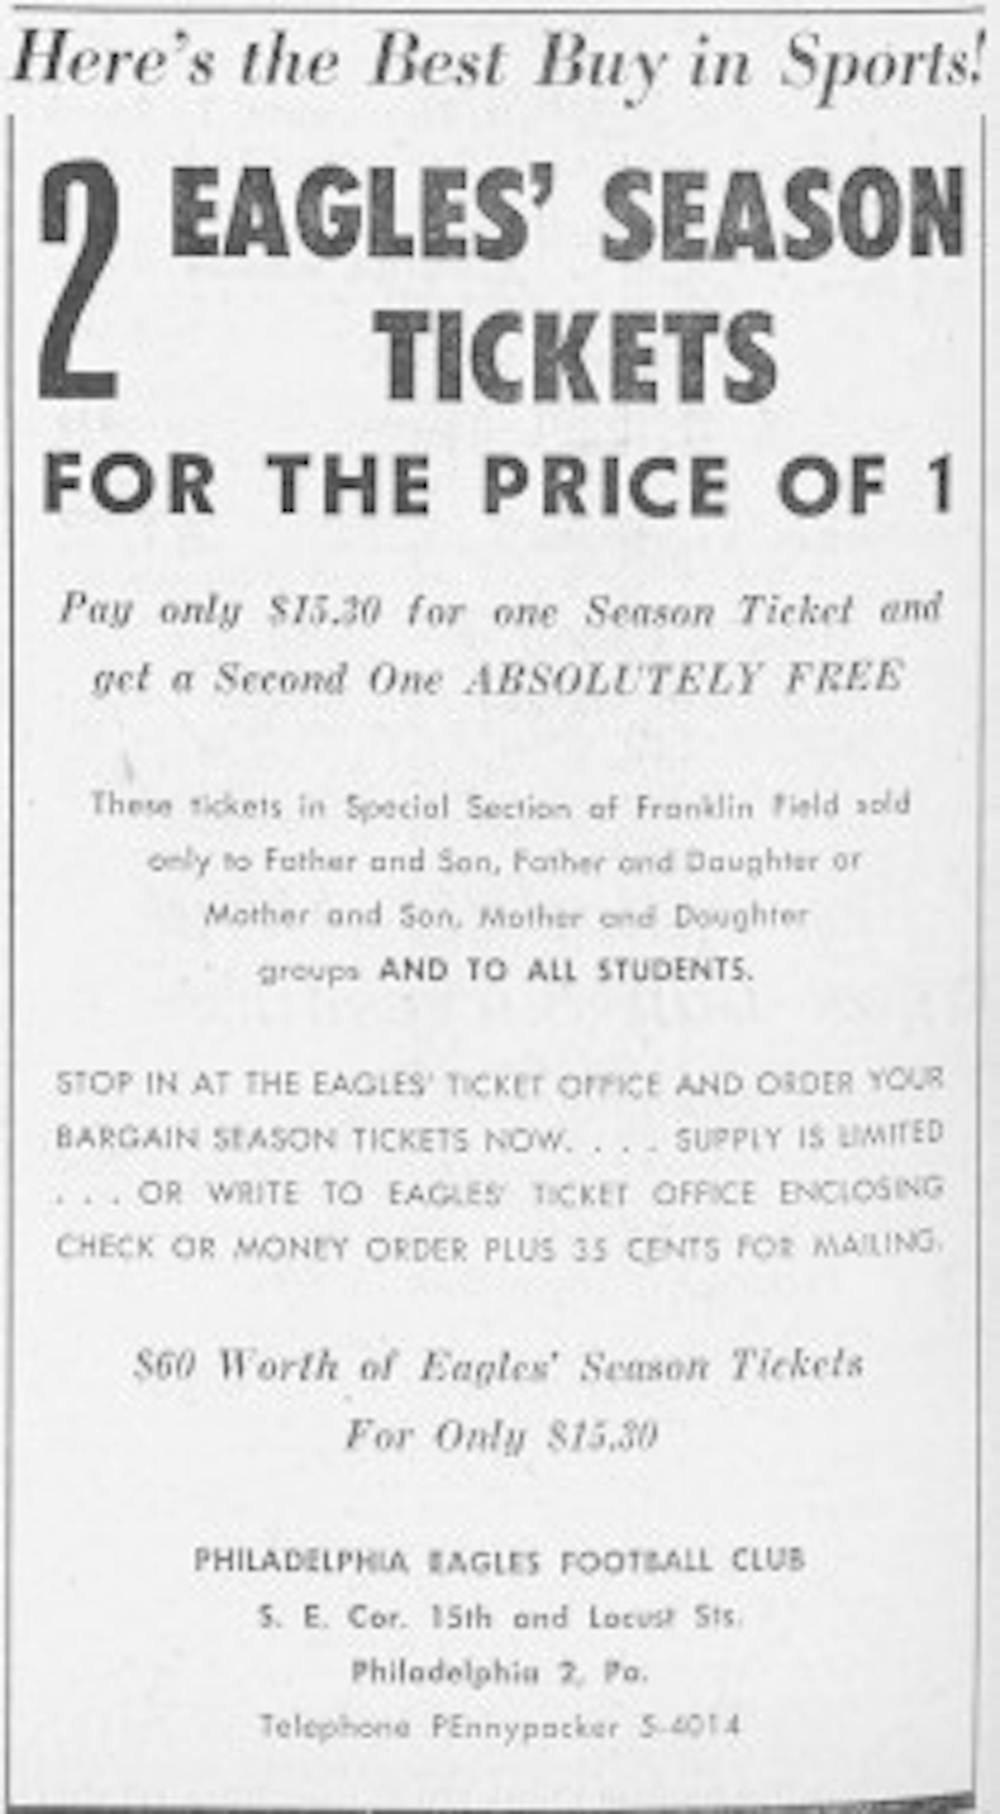 Long before the Linc, the Eagles called Franklin Field their home